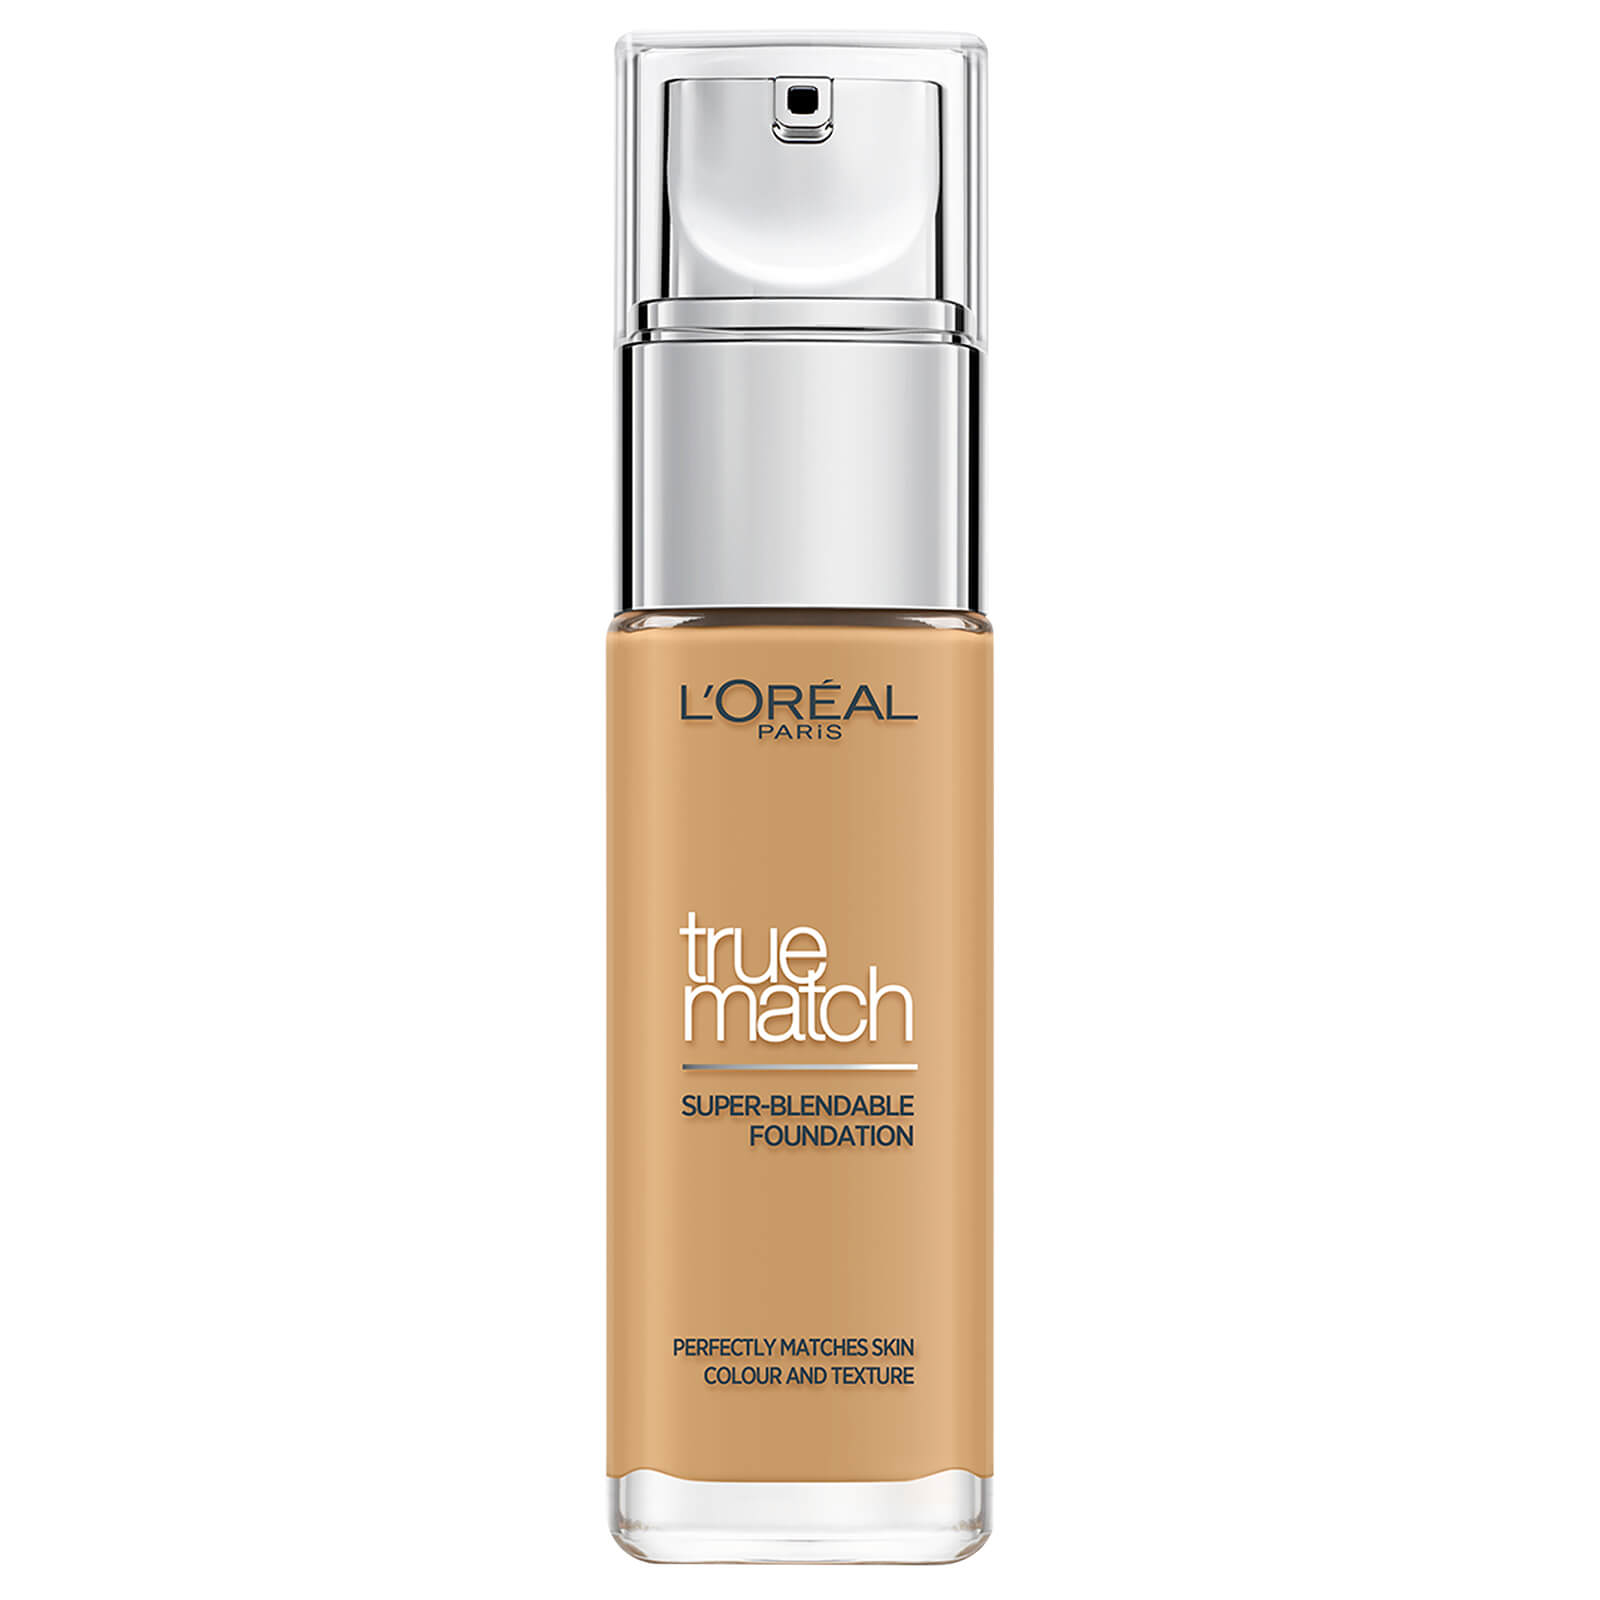 L'Oréal Paris True Match Liquid Foundation with SPF and Hyaluronic Acid 30ml (Various Shades) - 6W Golden Honey